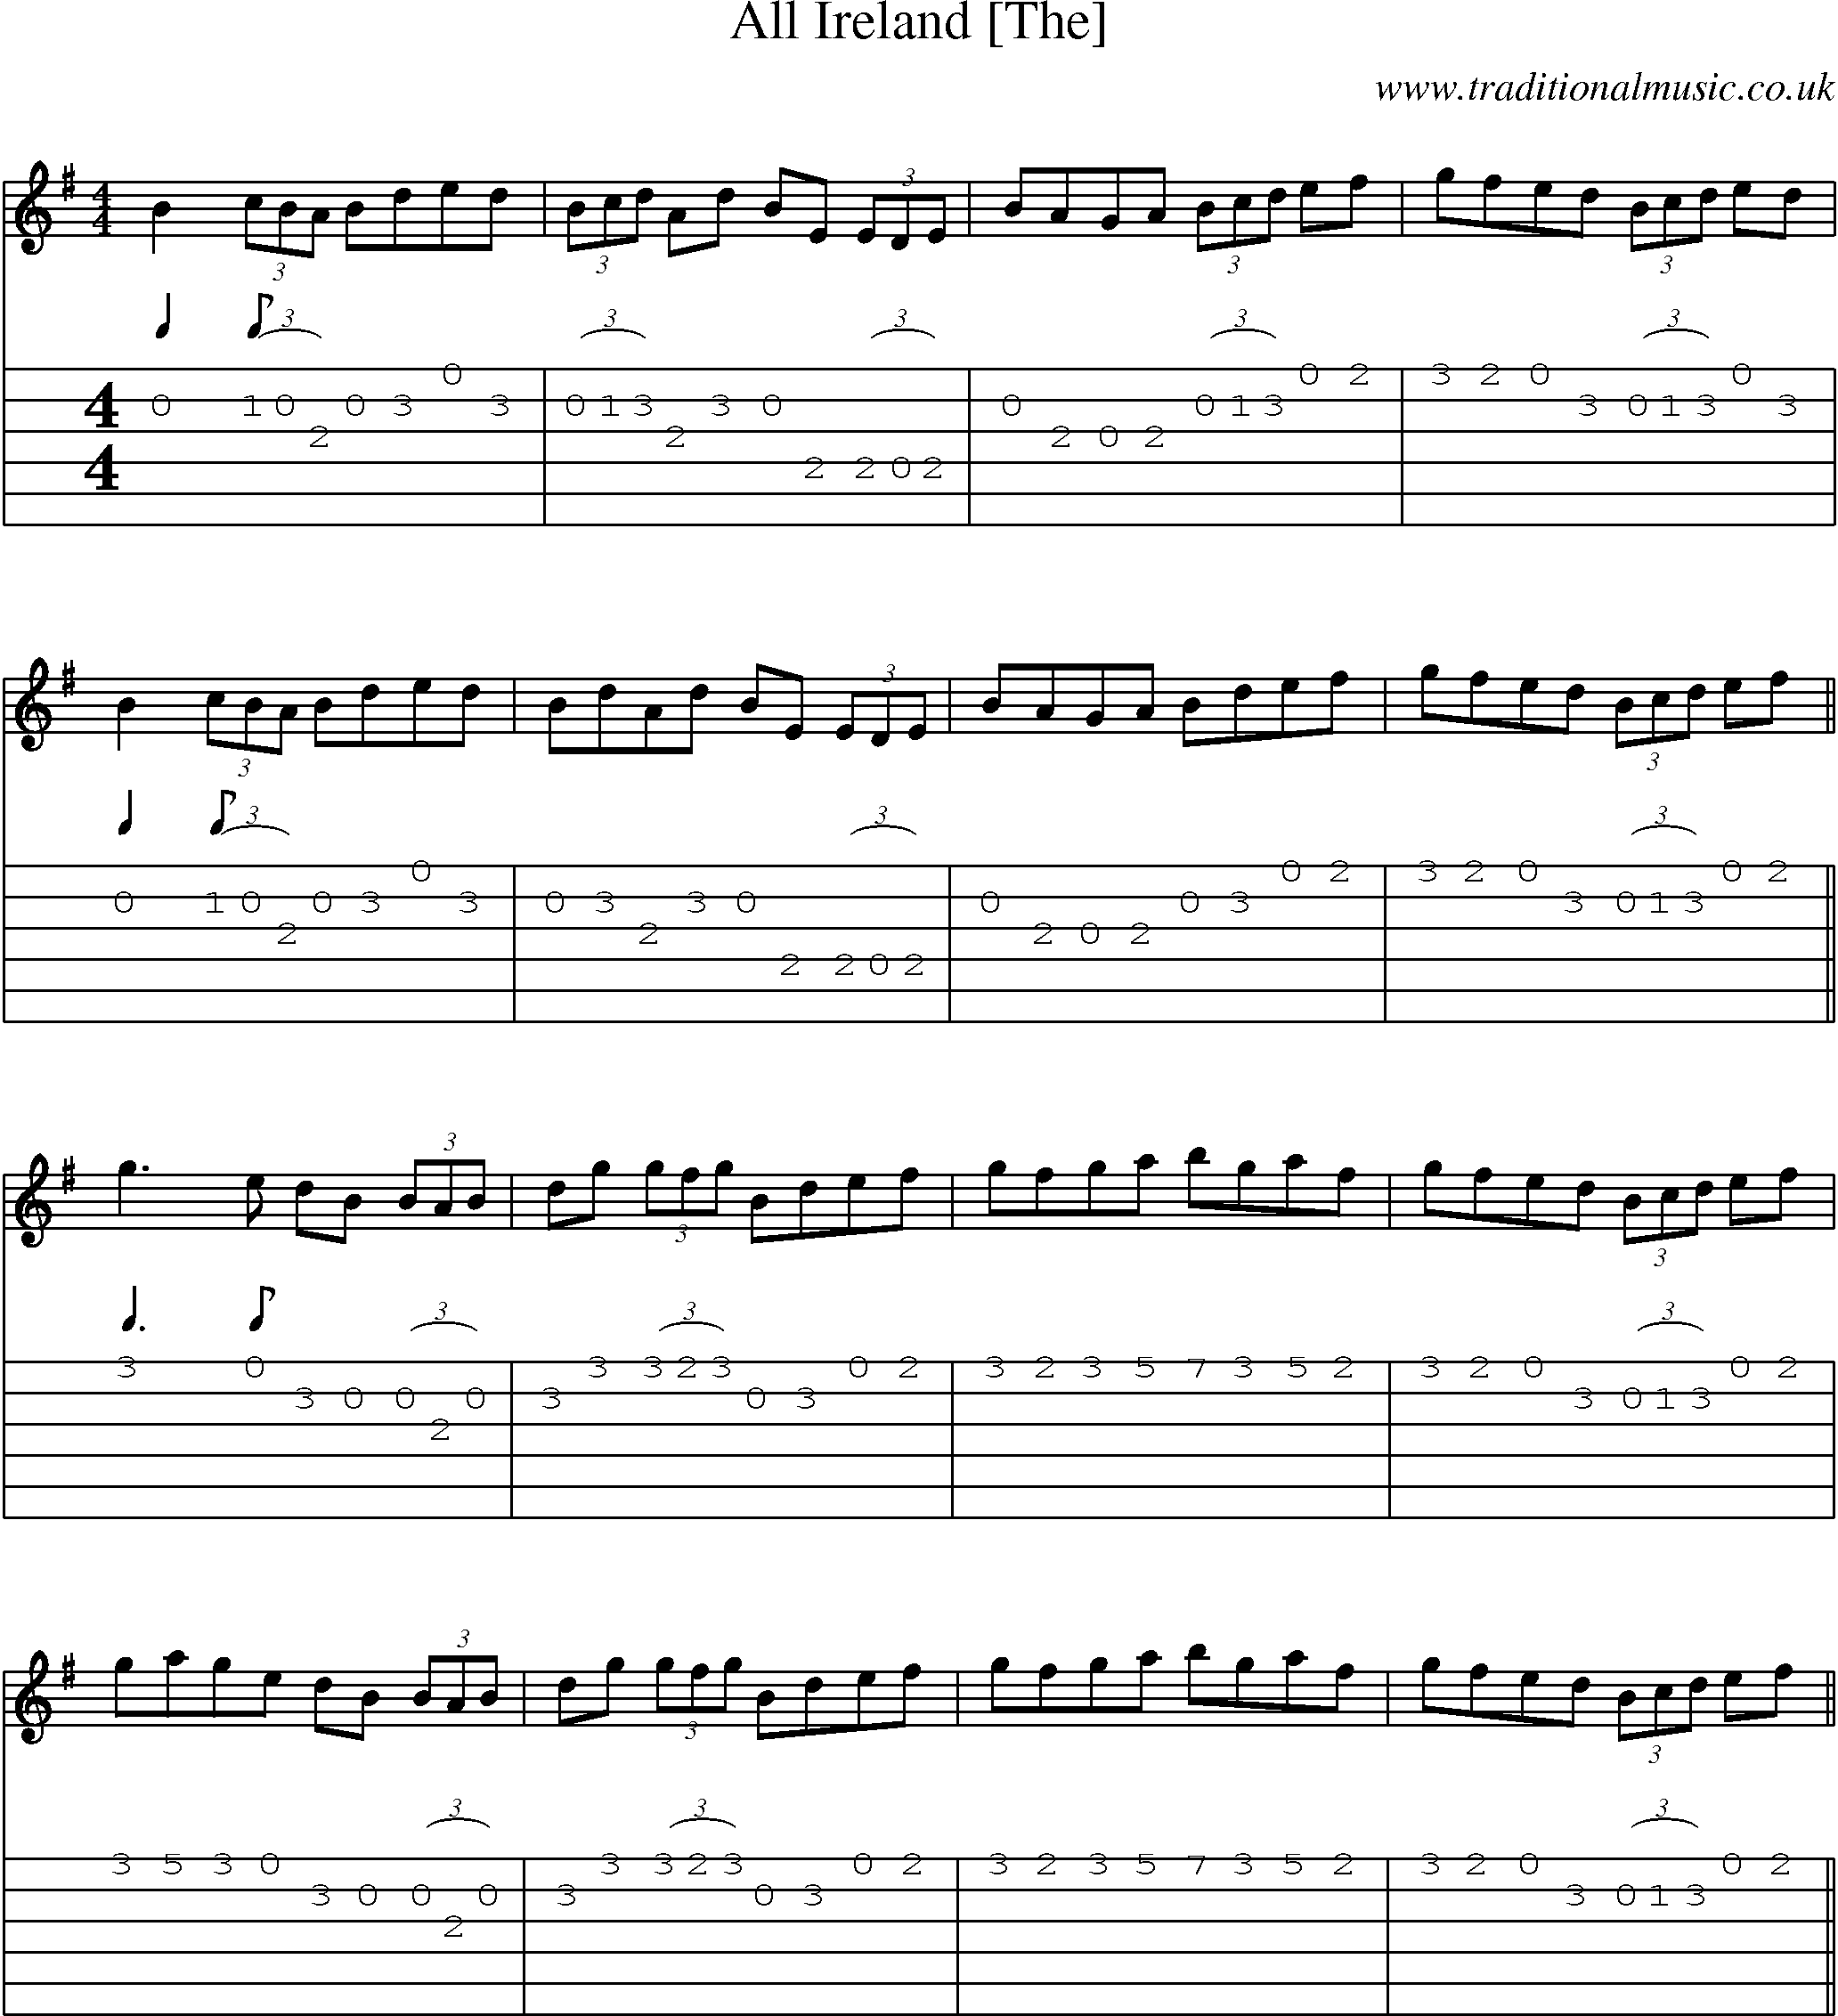 Music Score and Guitar Tabs for All Ireland